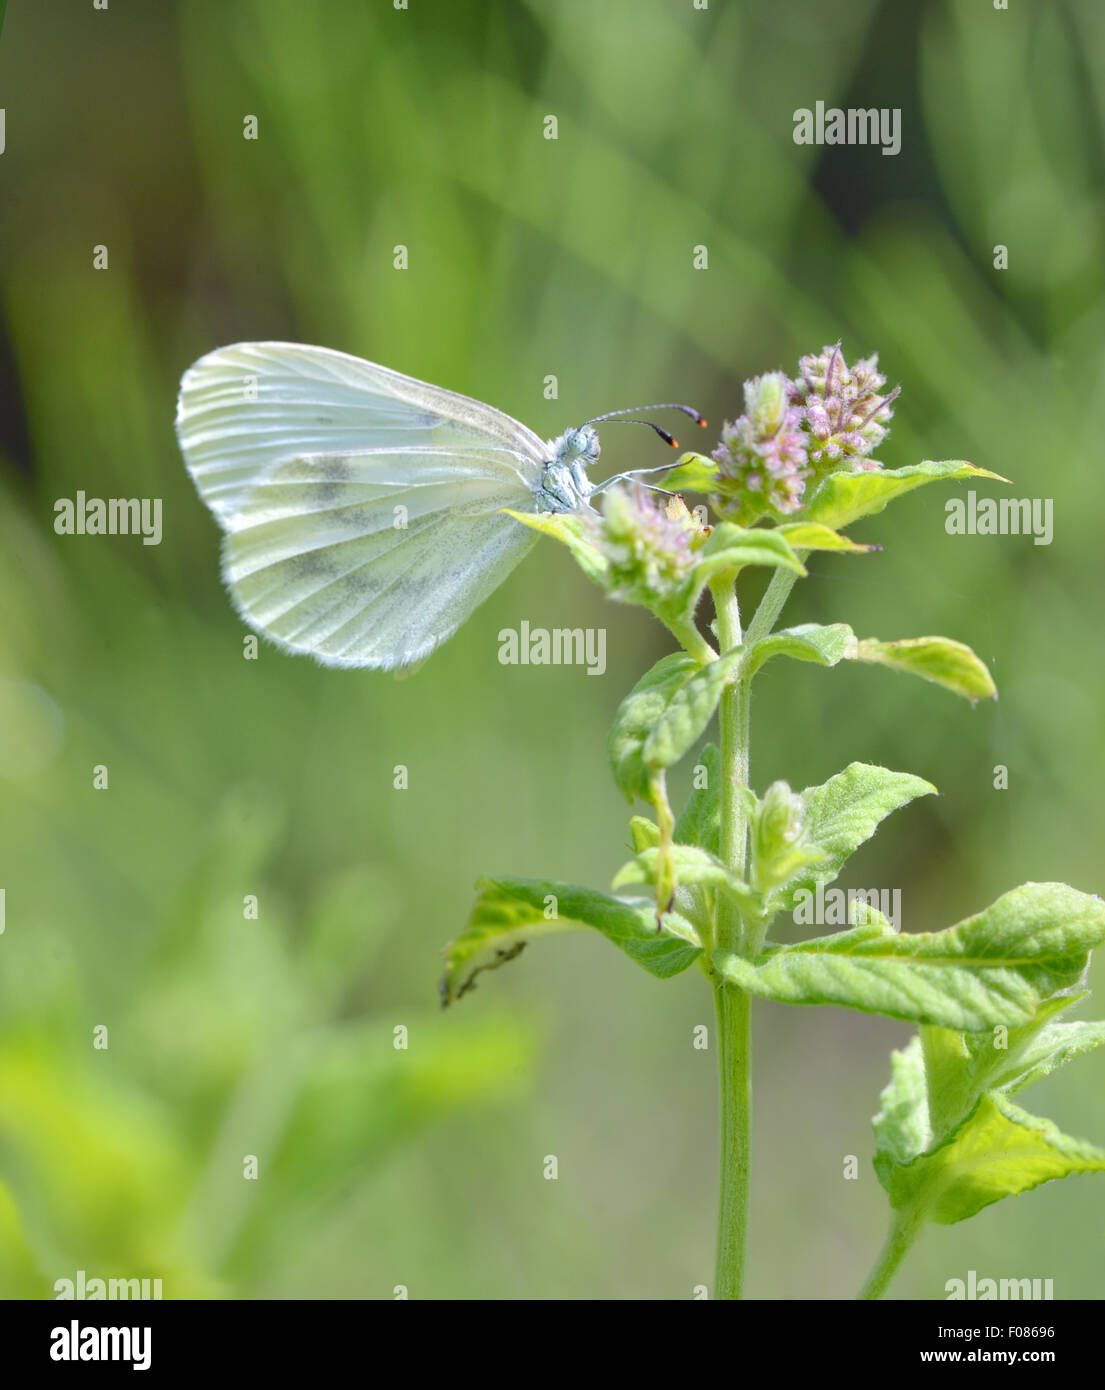 cabbage white butterfly in garden Stock Photo